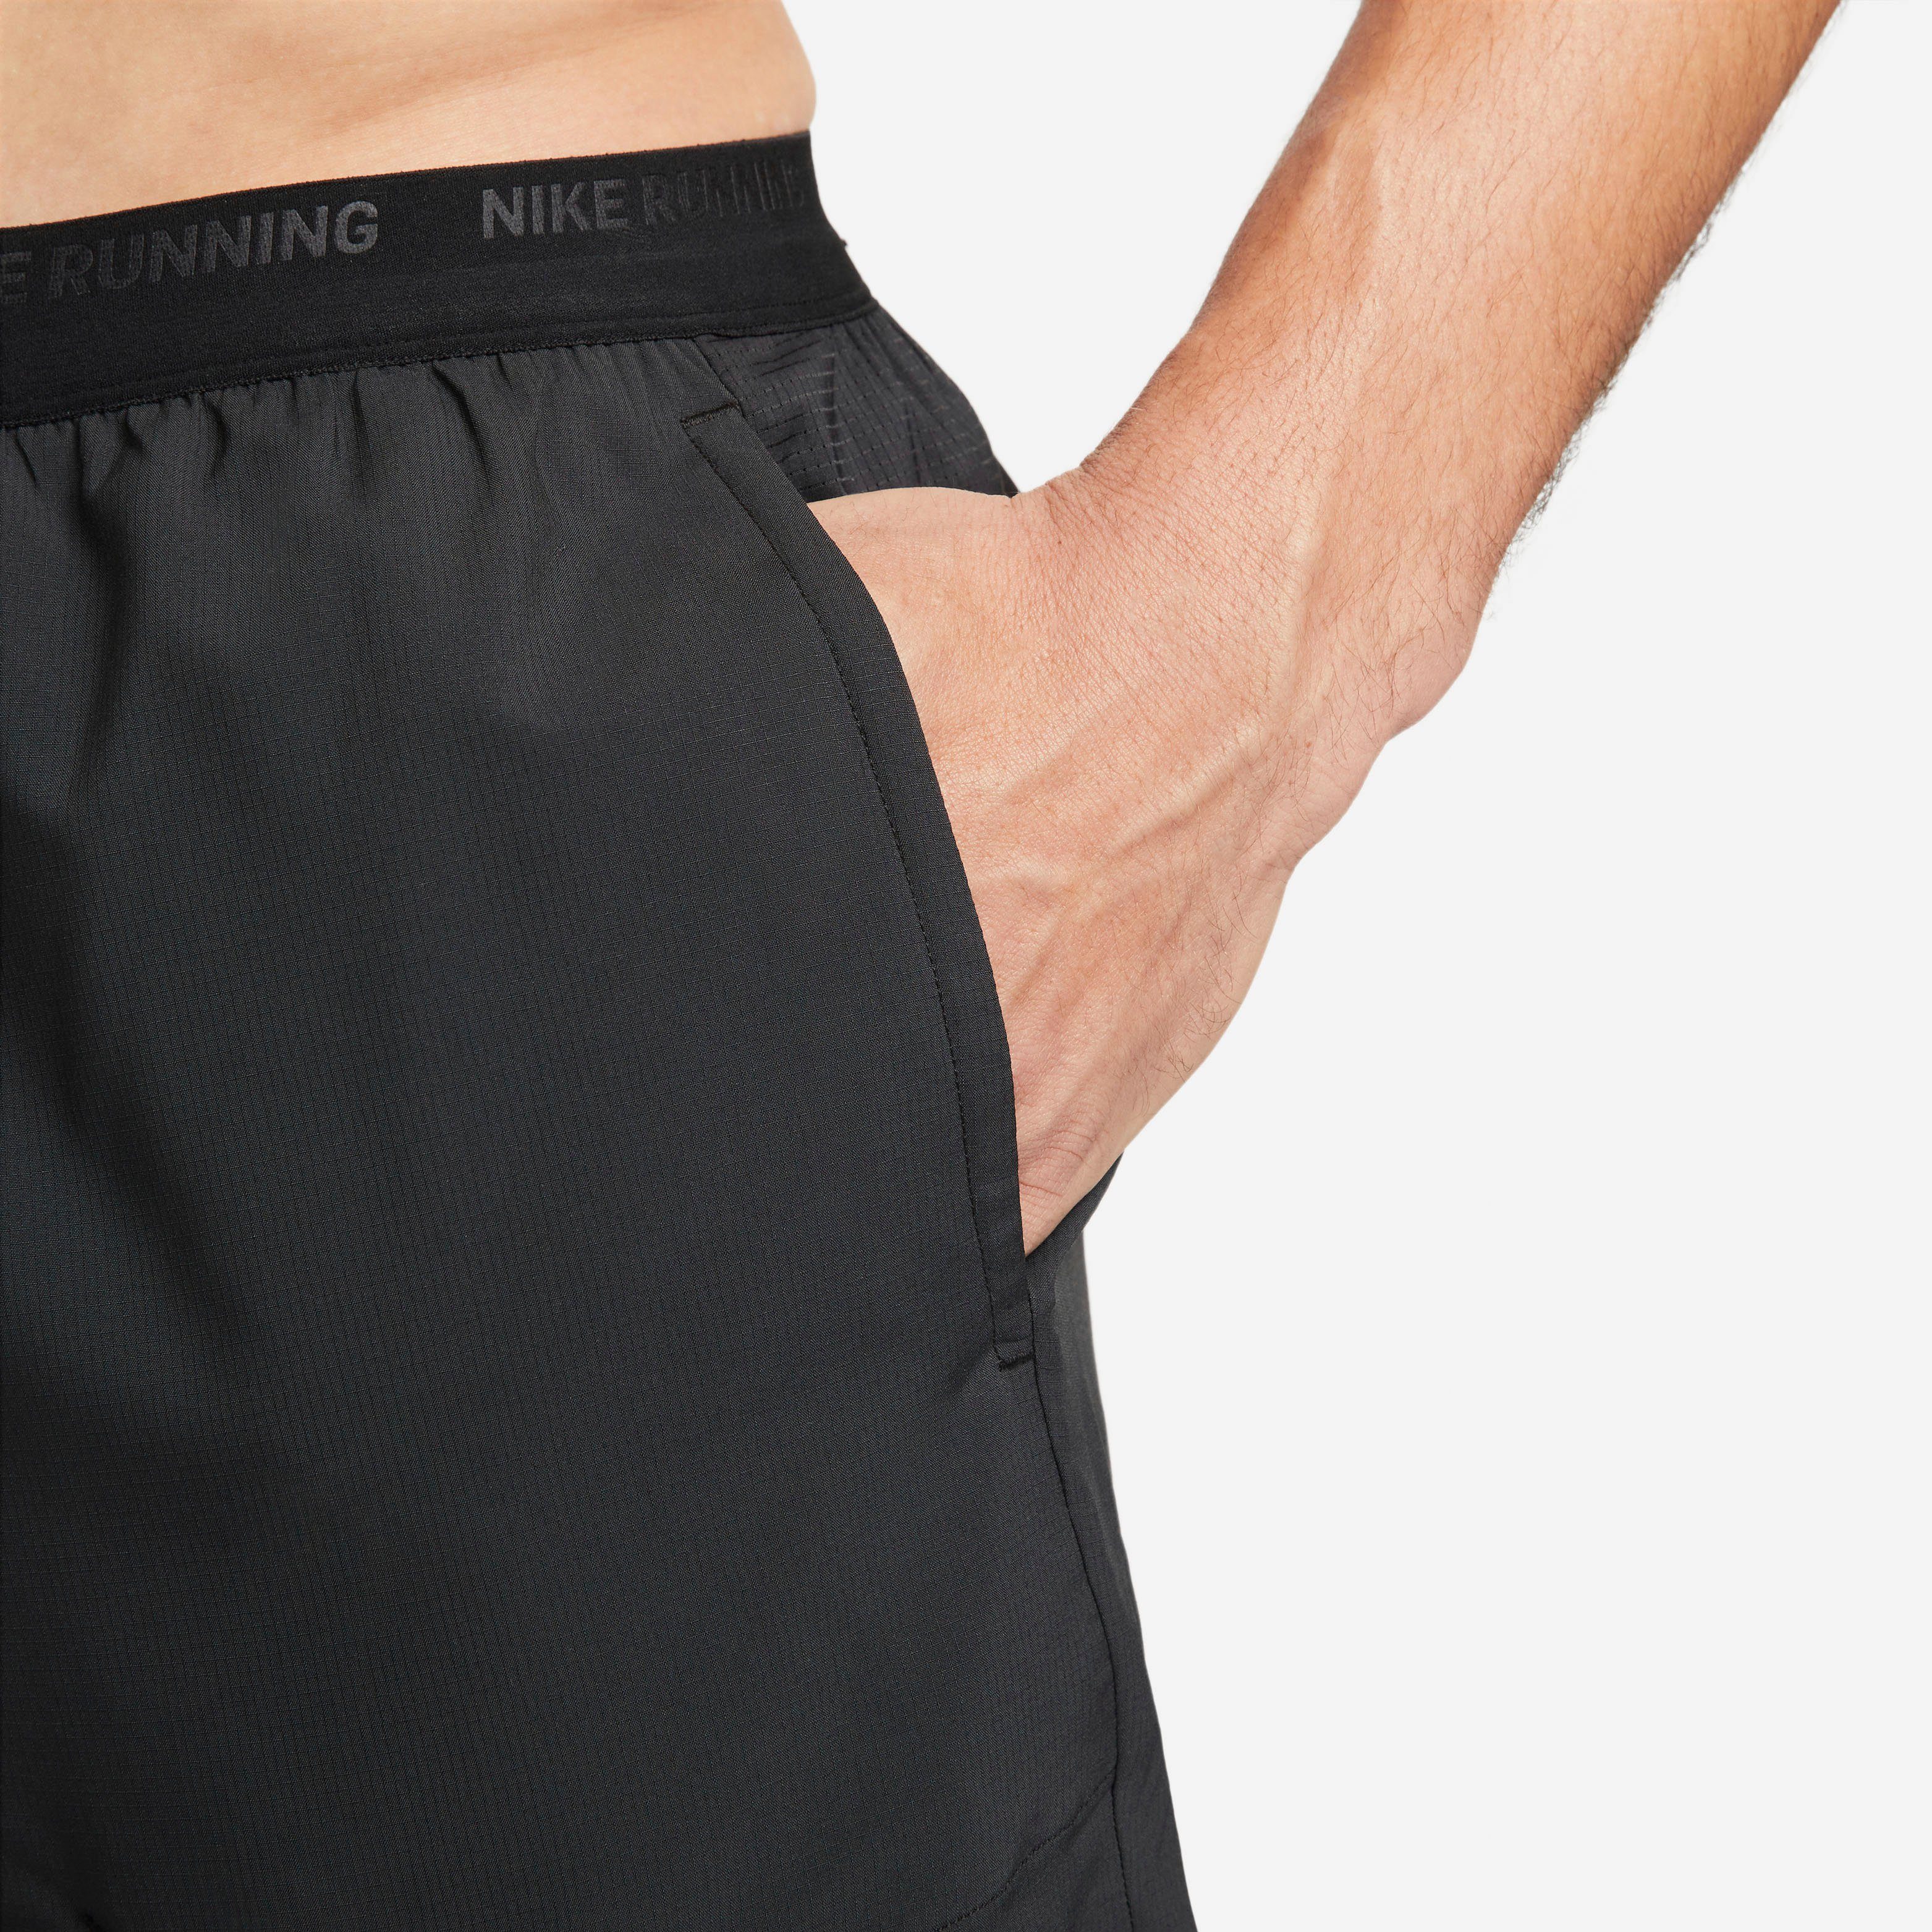 Dri-FIT Men's Nike Brief-Lined " Shorts Laufshorts Stride Running